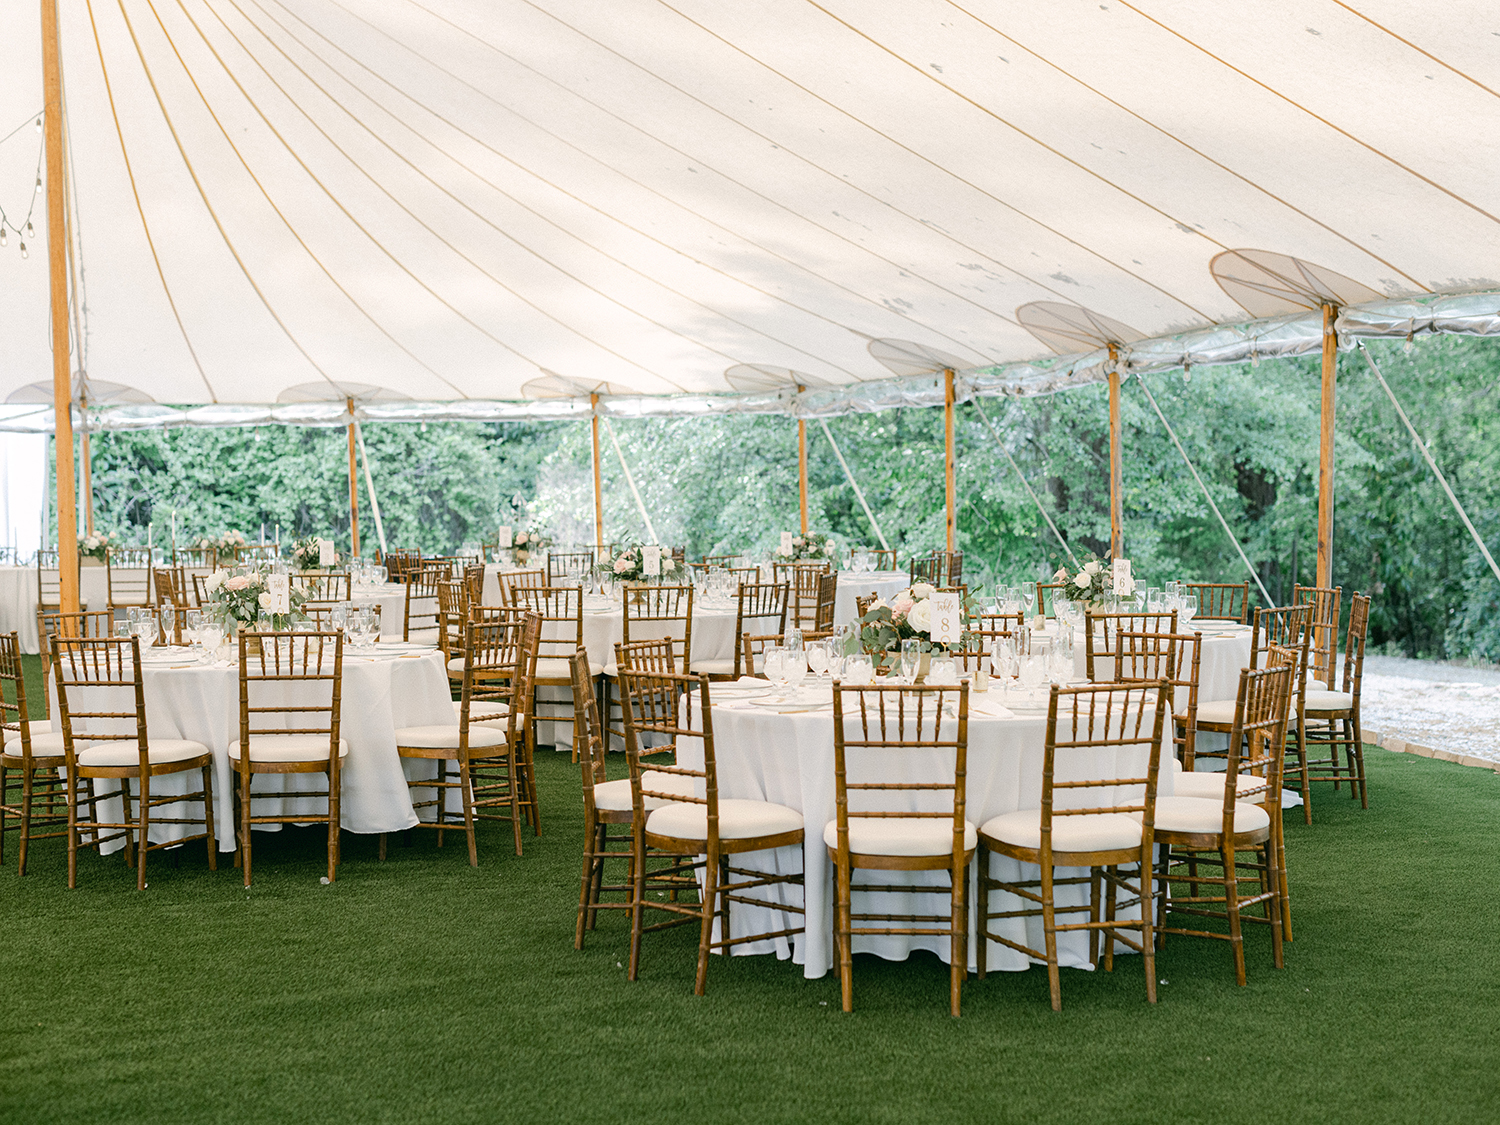 Skyline Events and Socials Wedding Reception outside under a white tent